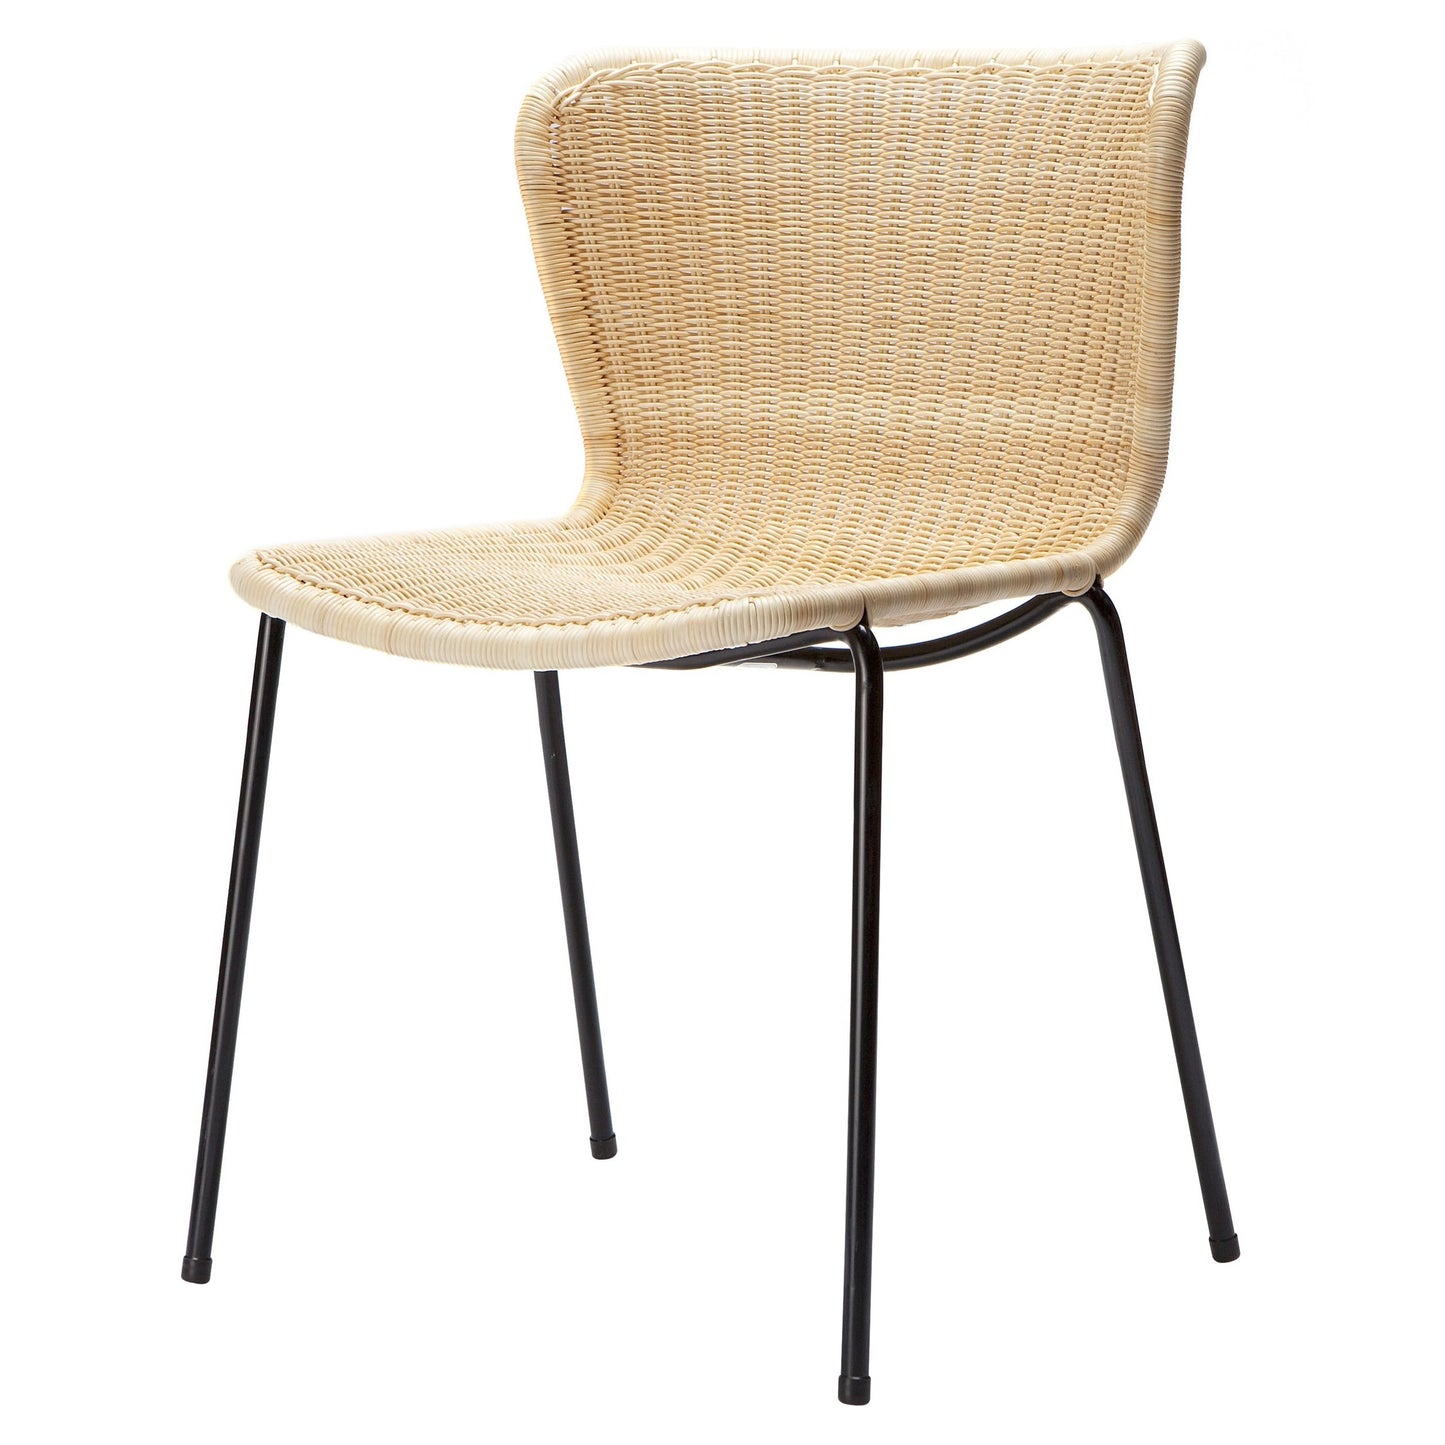 Rattan "Wing" Outdoor Dining Chair